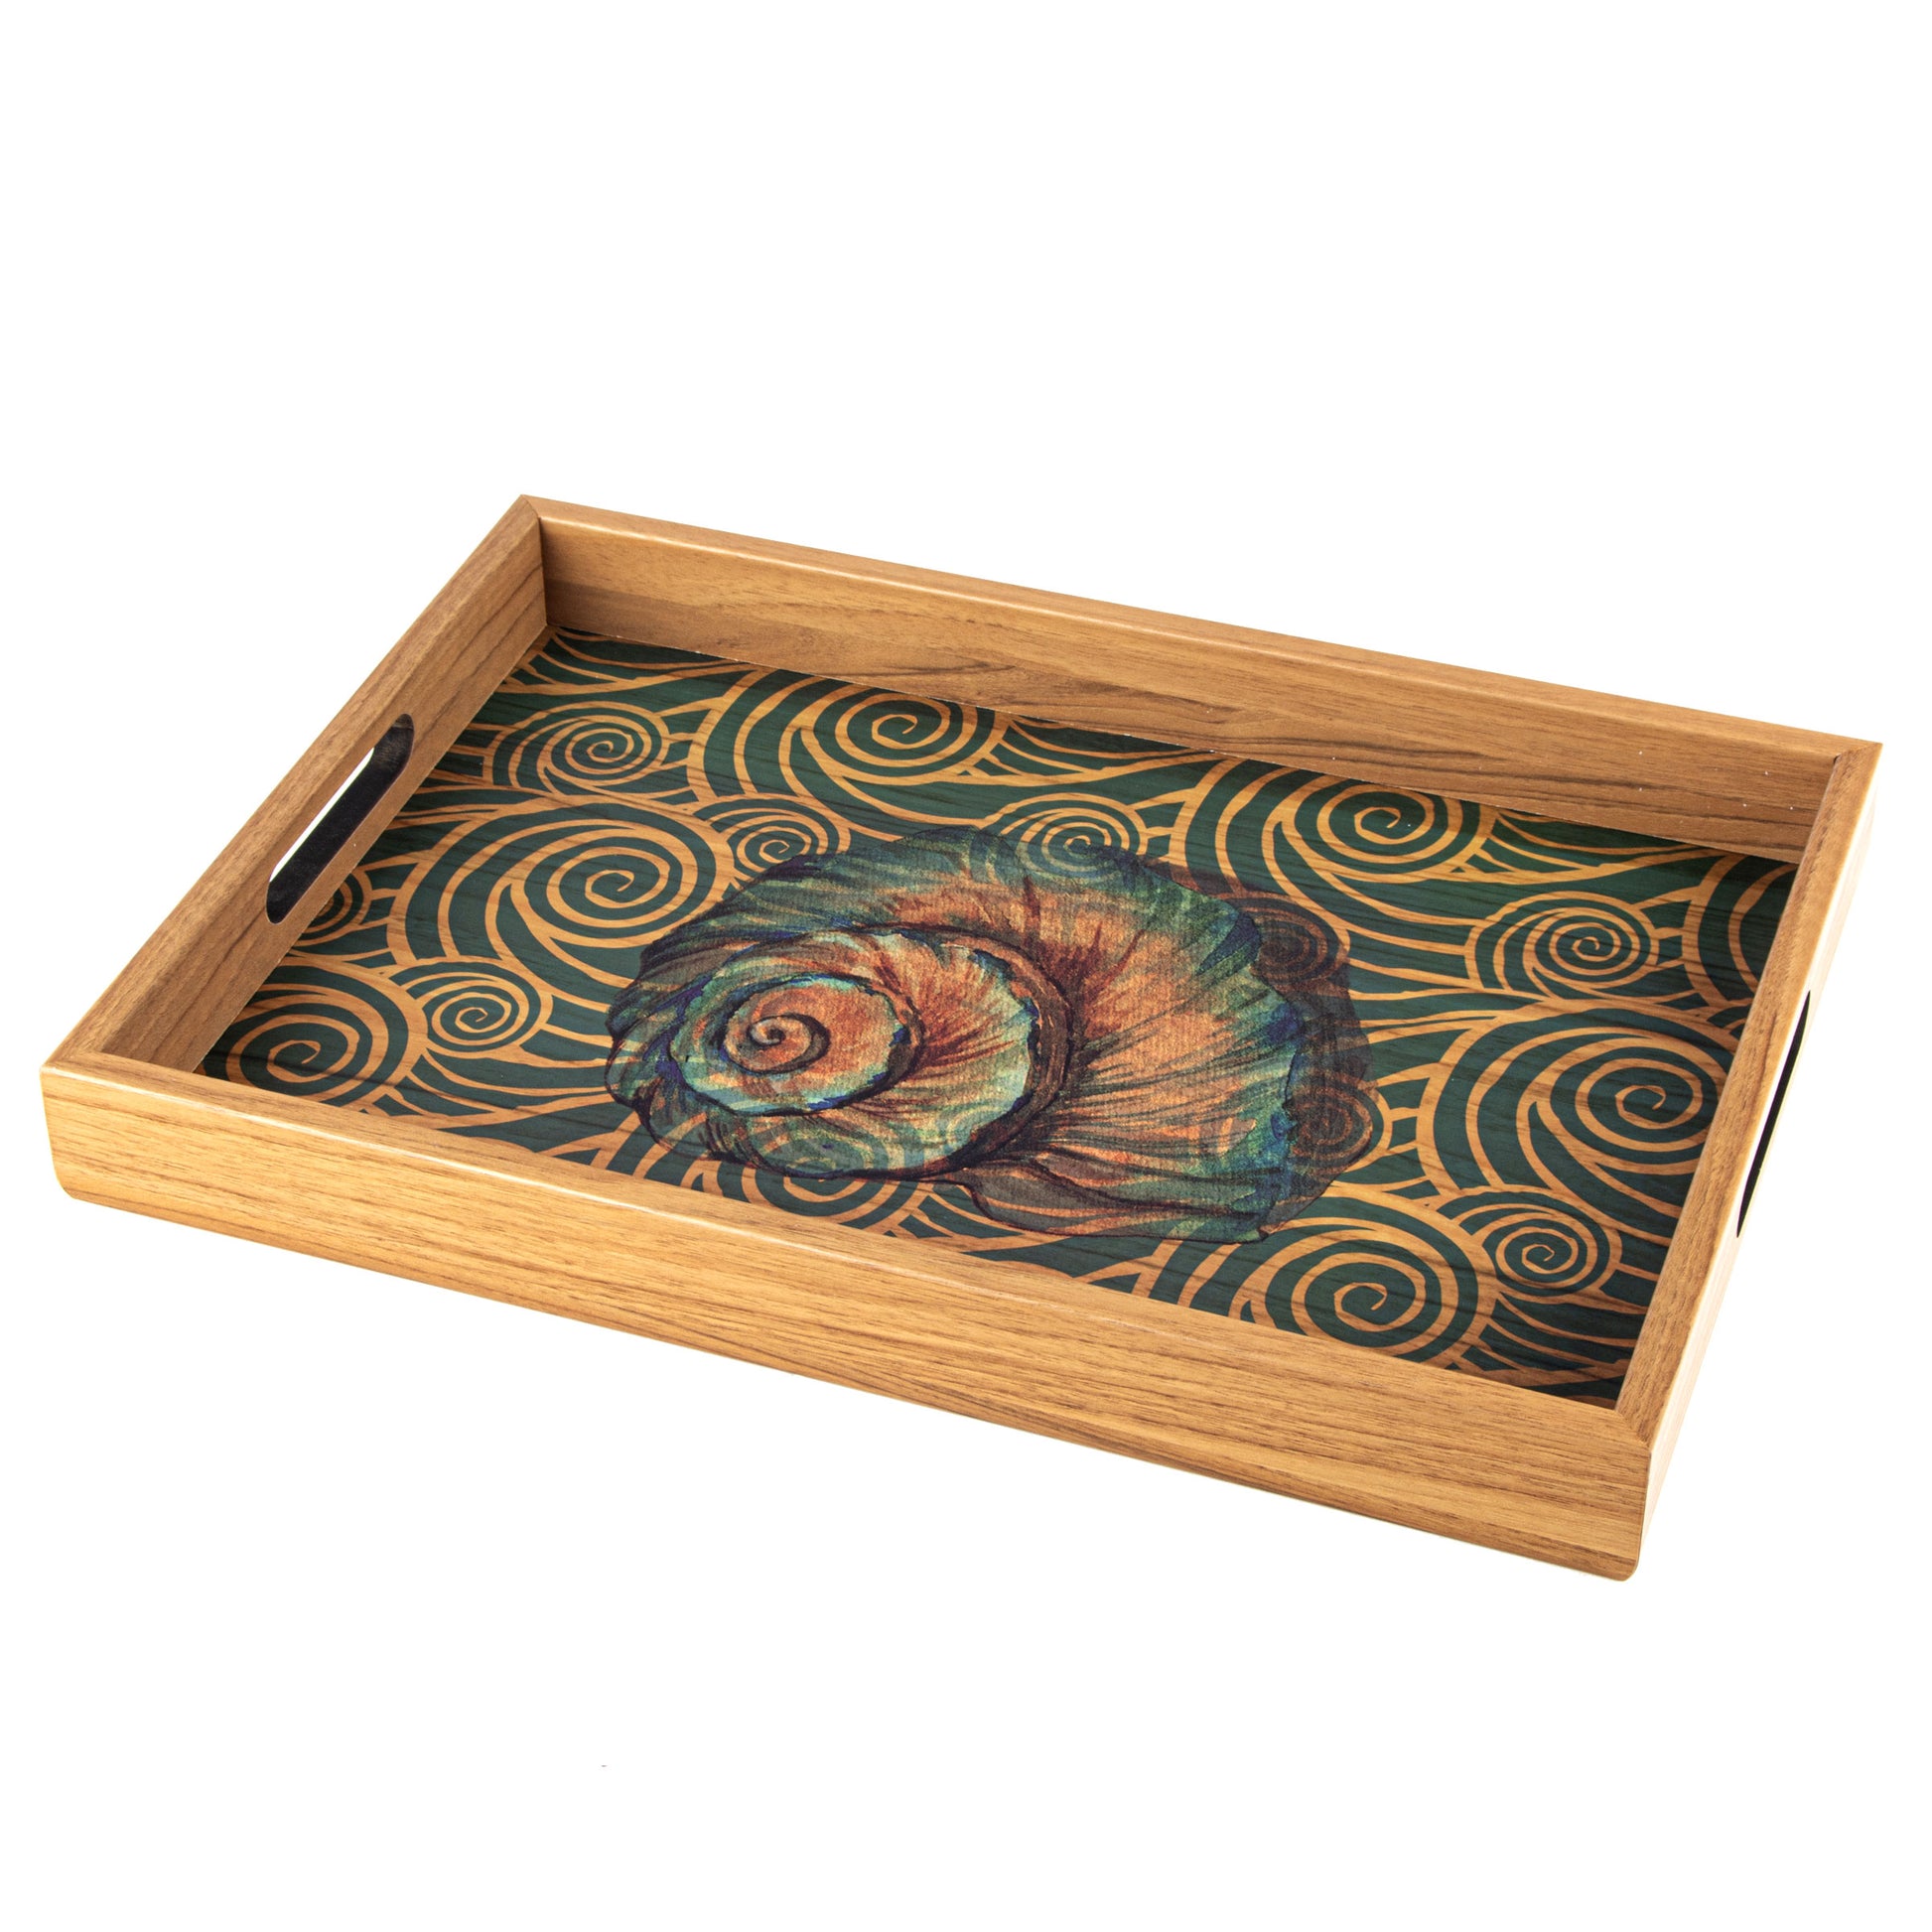 Elegant Wooden Tray with Ocean Printed Design - Luxury Game Room Decor - Premium Decorative Objects from MANOPOULOS Chess & Backgammon - Just €25! Shop now at MANOPOULOS Chess & Backgammon